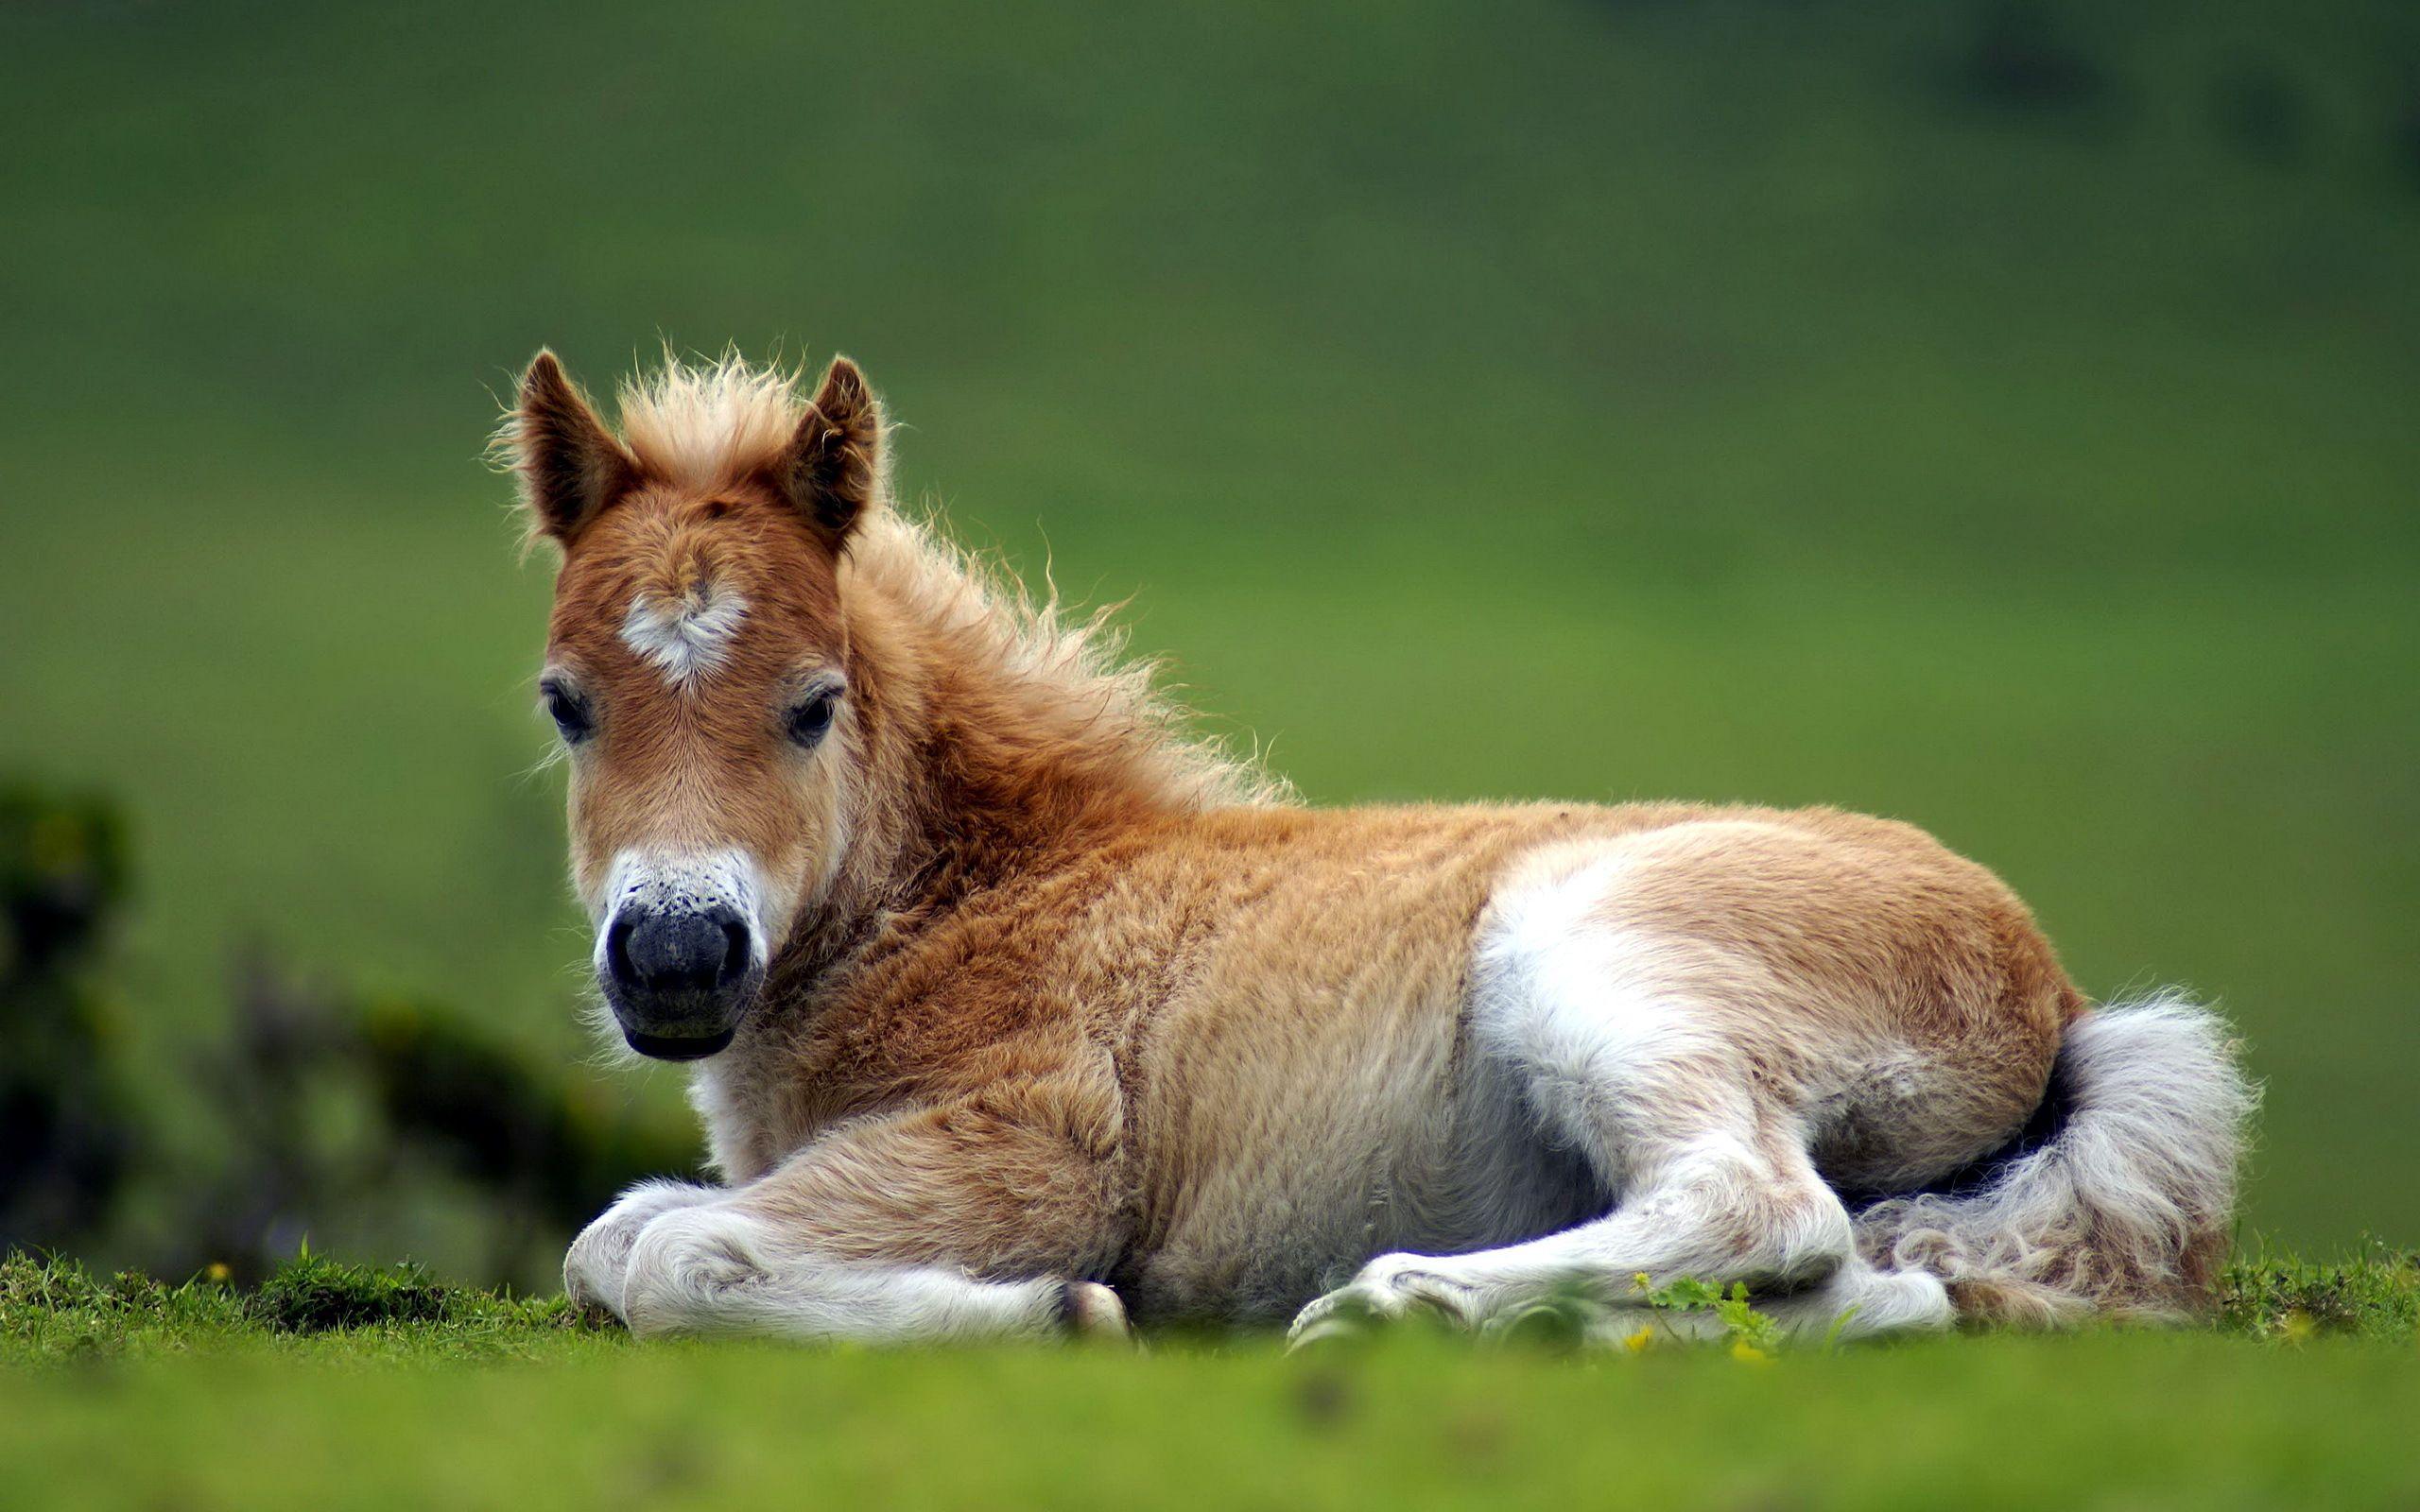 cute baby horse images